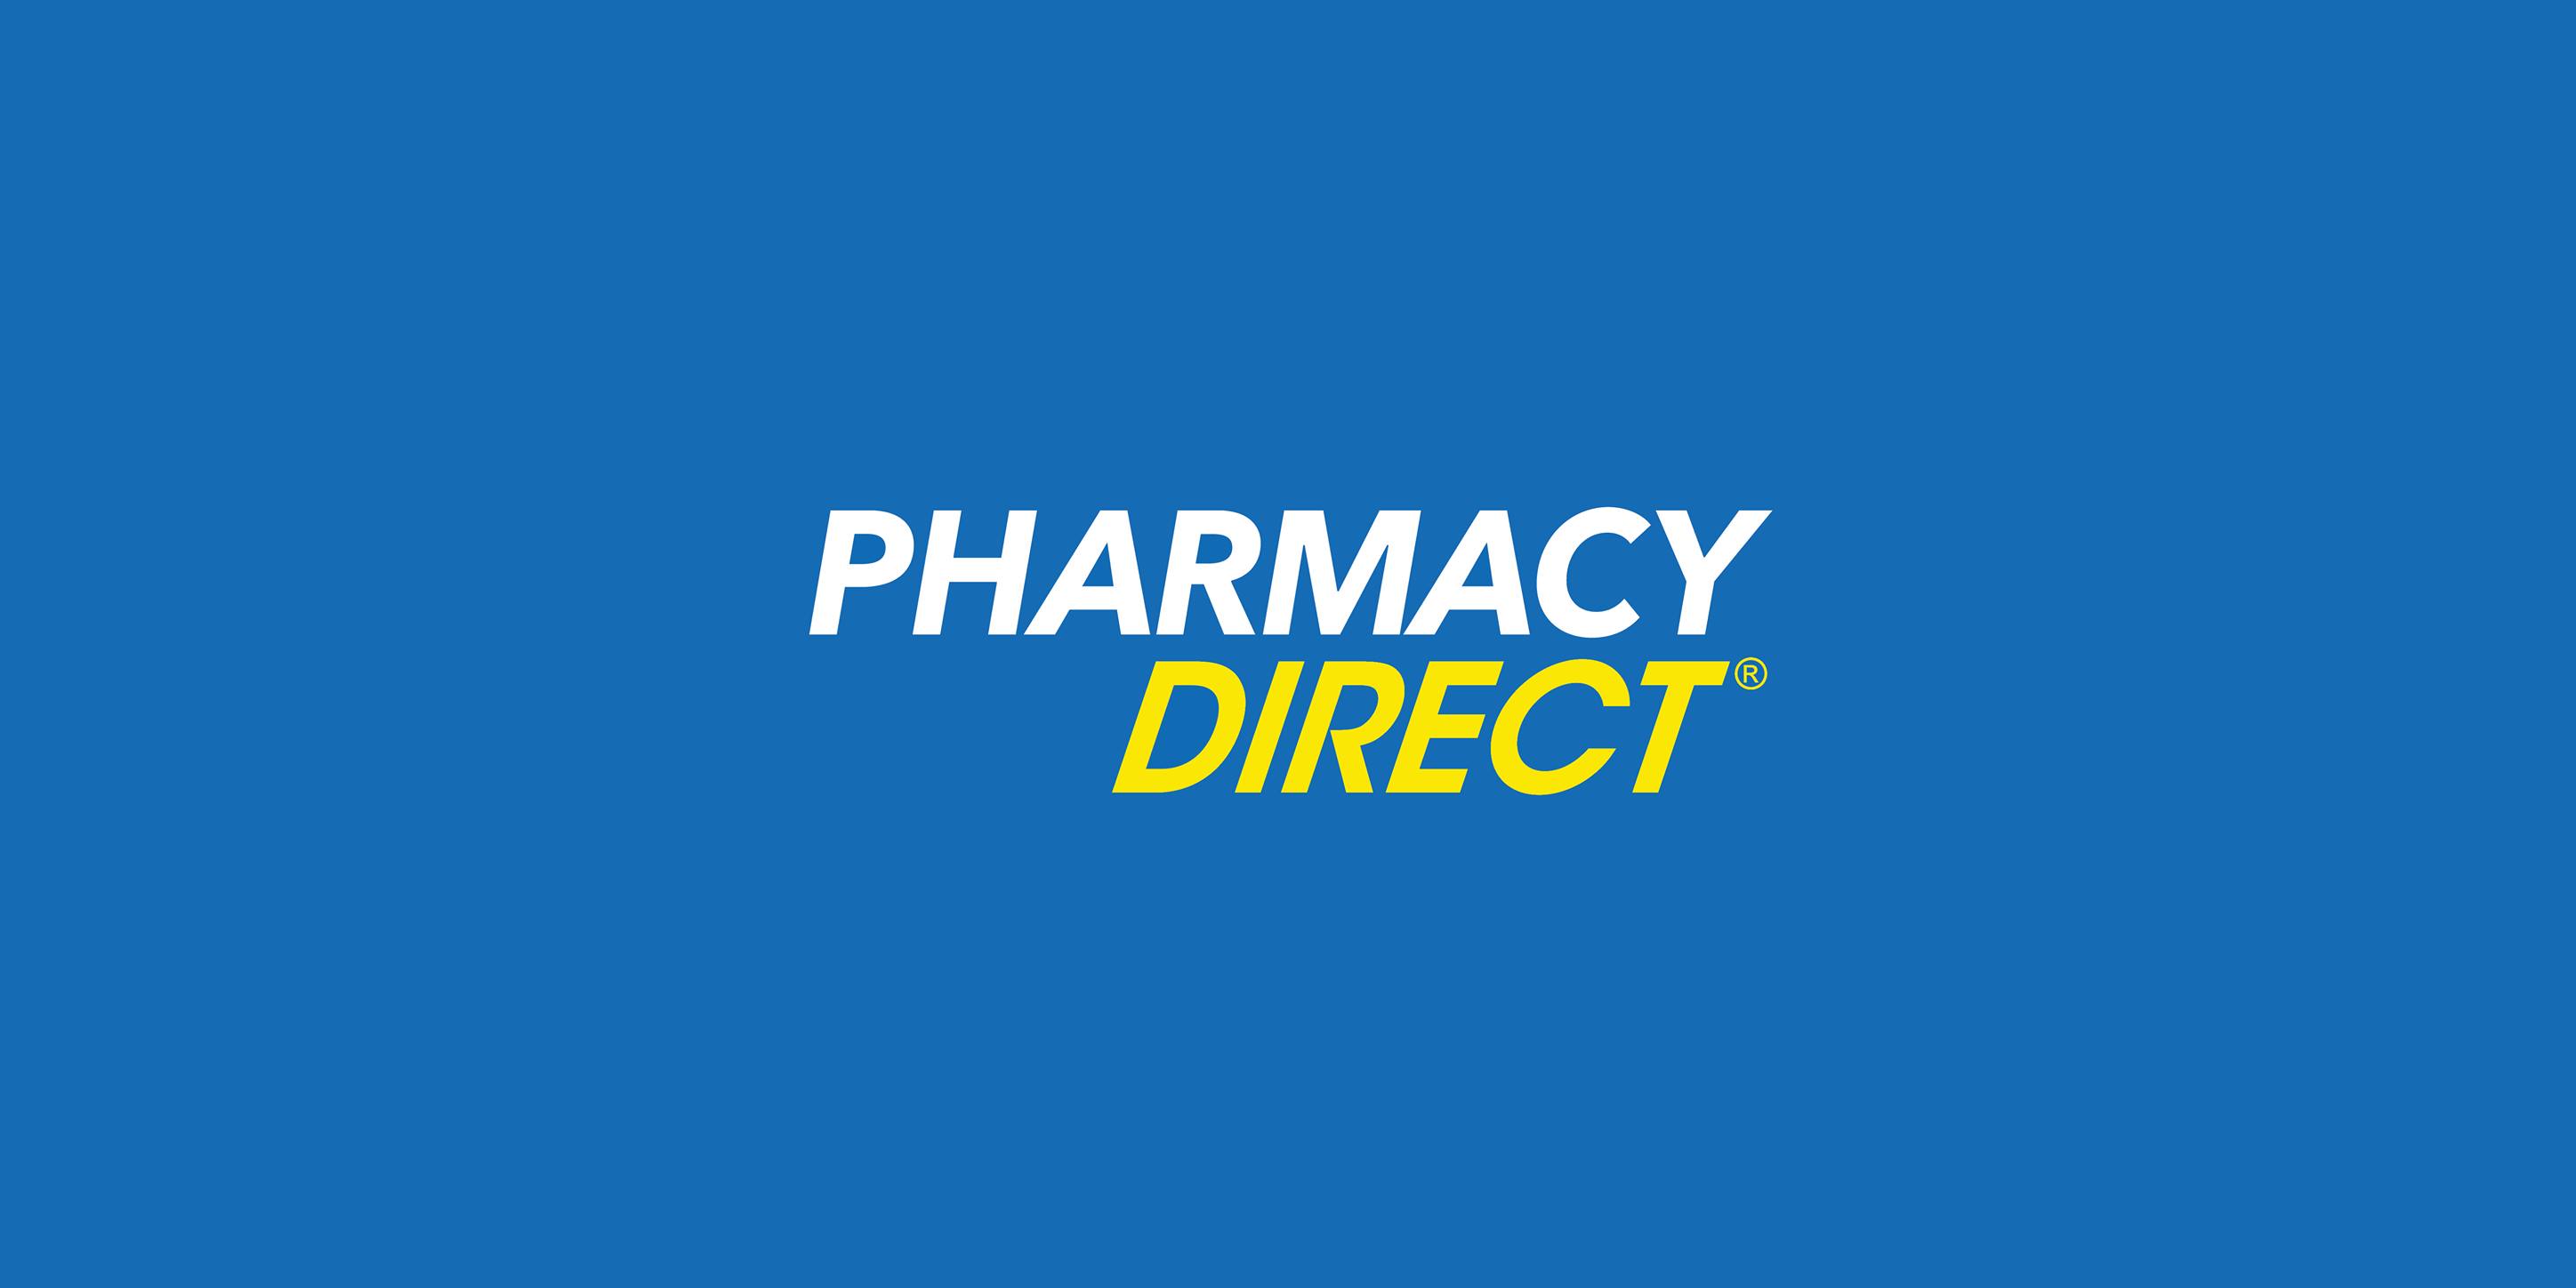 Shh, Free Shipping on orders over $30 with promo code at Pharmacy Direct